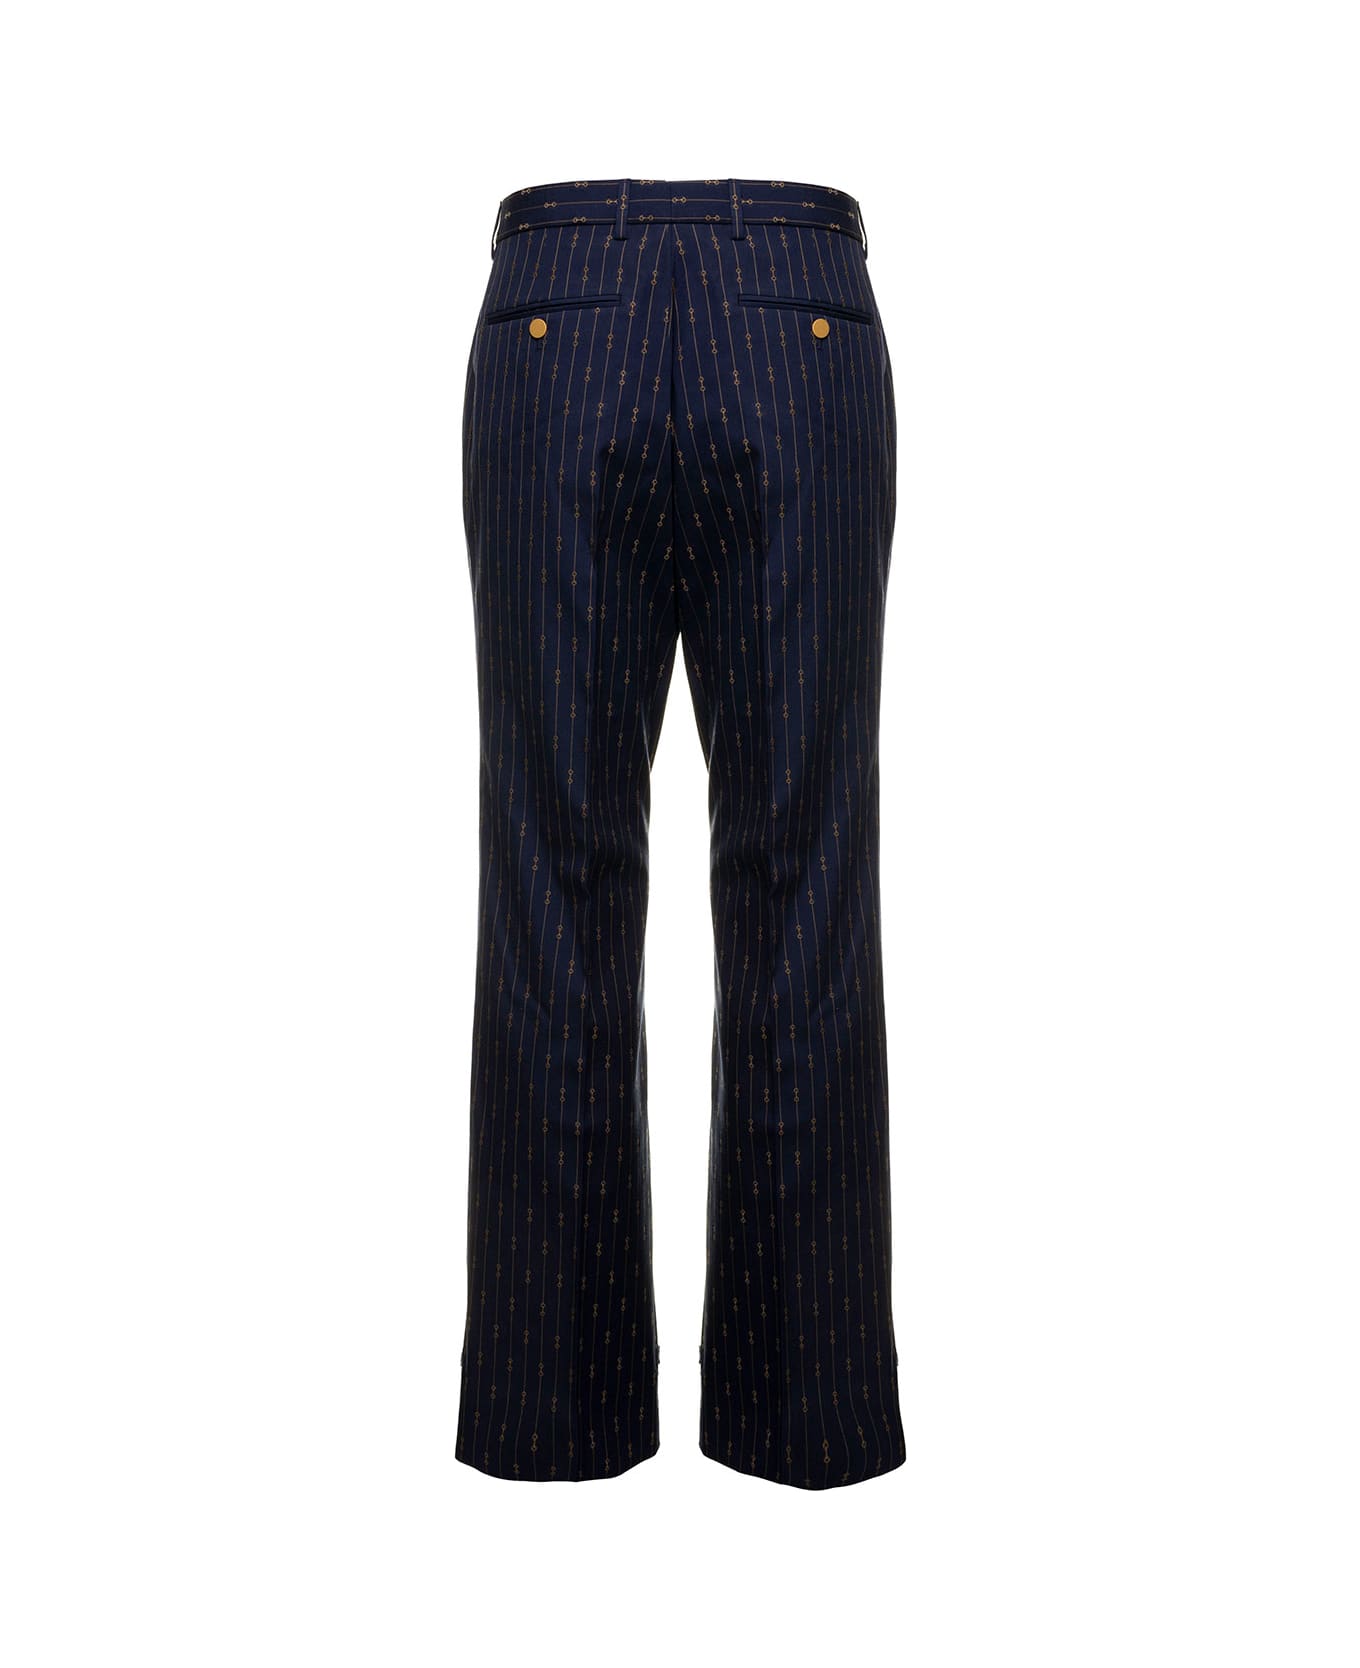 Gucci Man's Blue Wool Tailored Pants With Allover Horsebit Motif - blue ボトムス